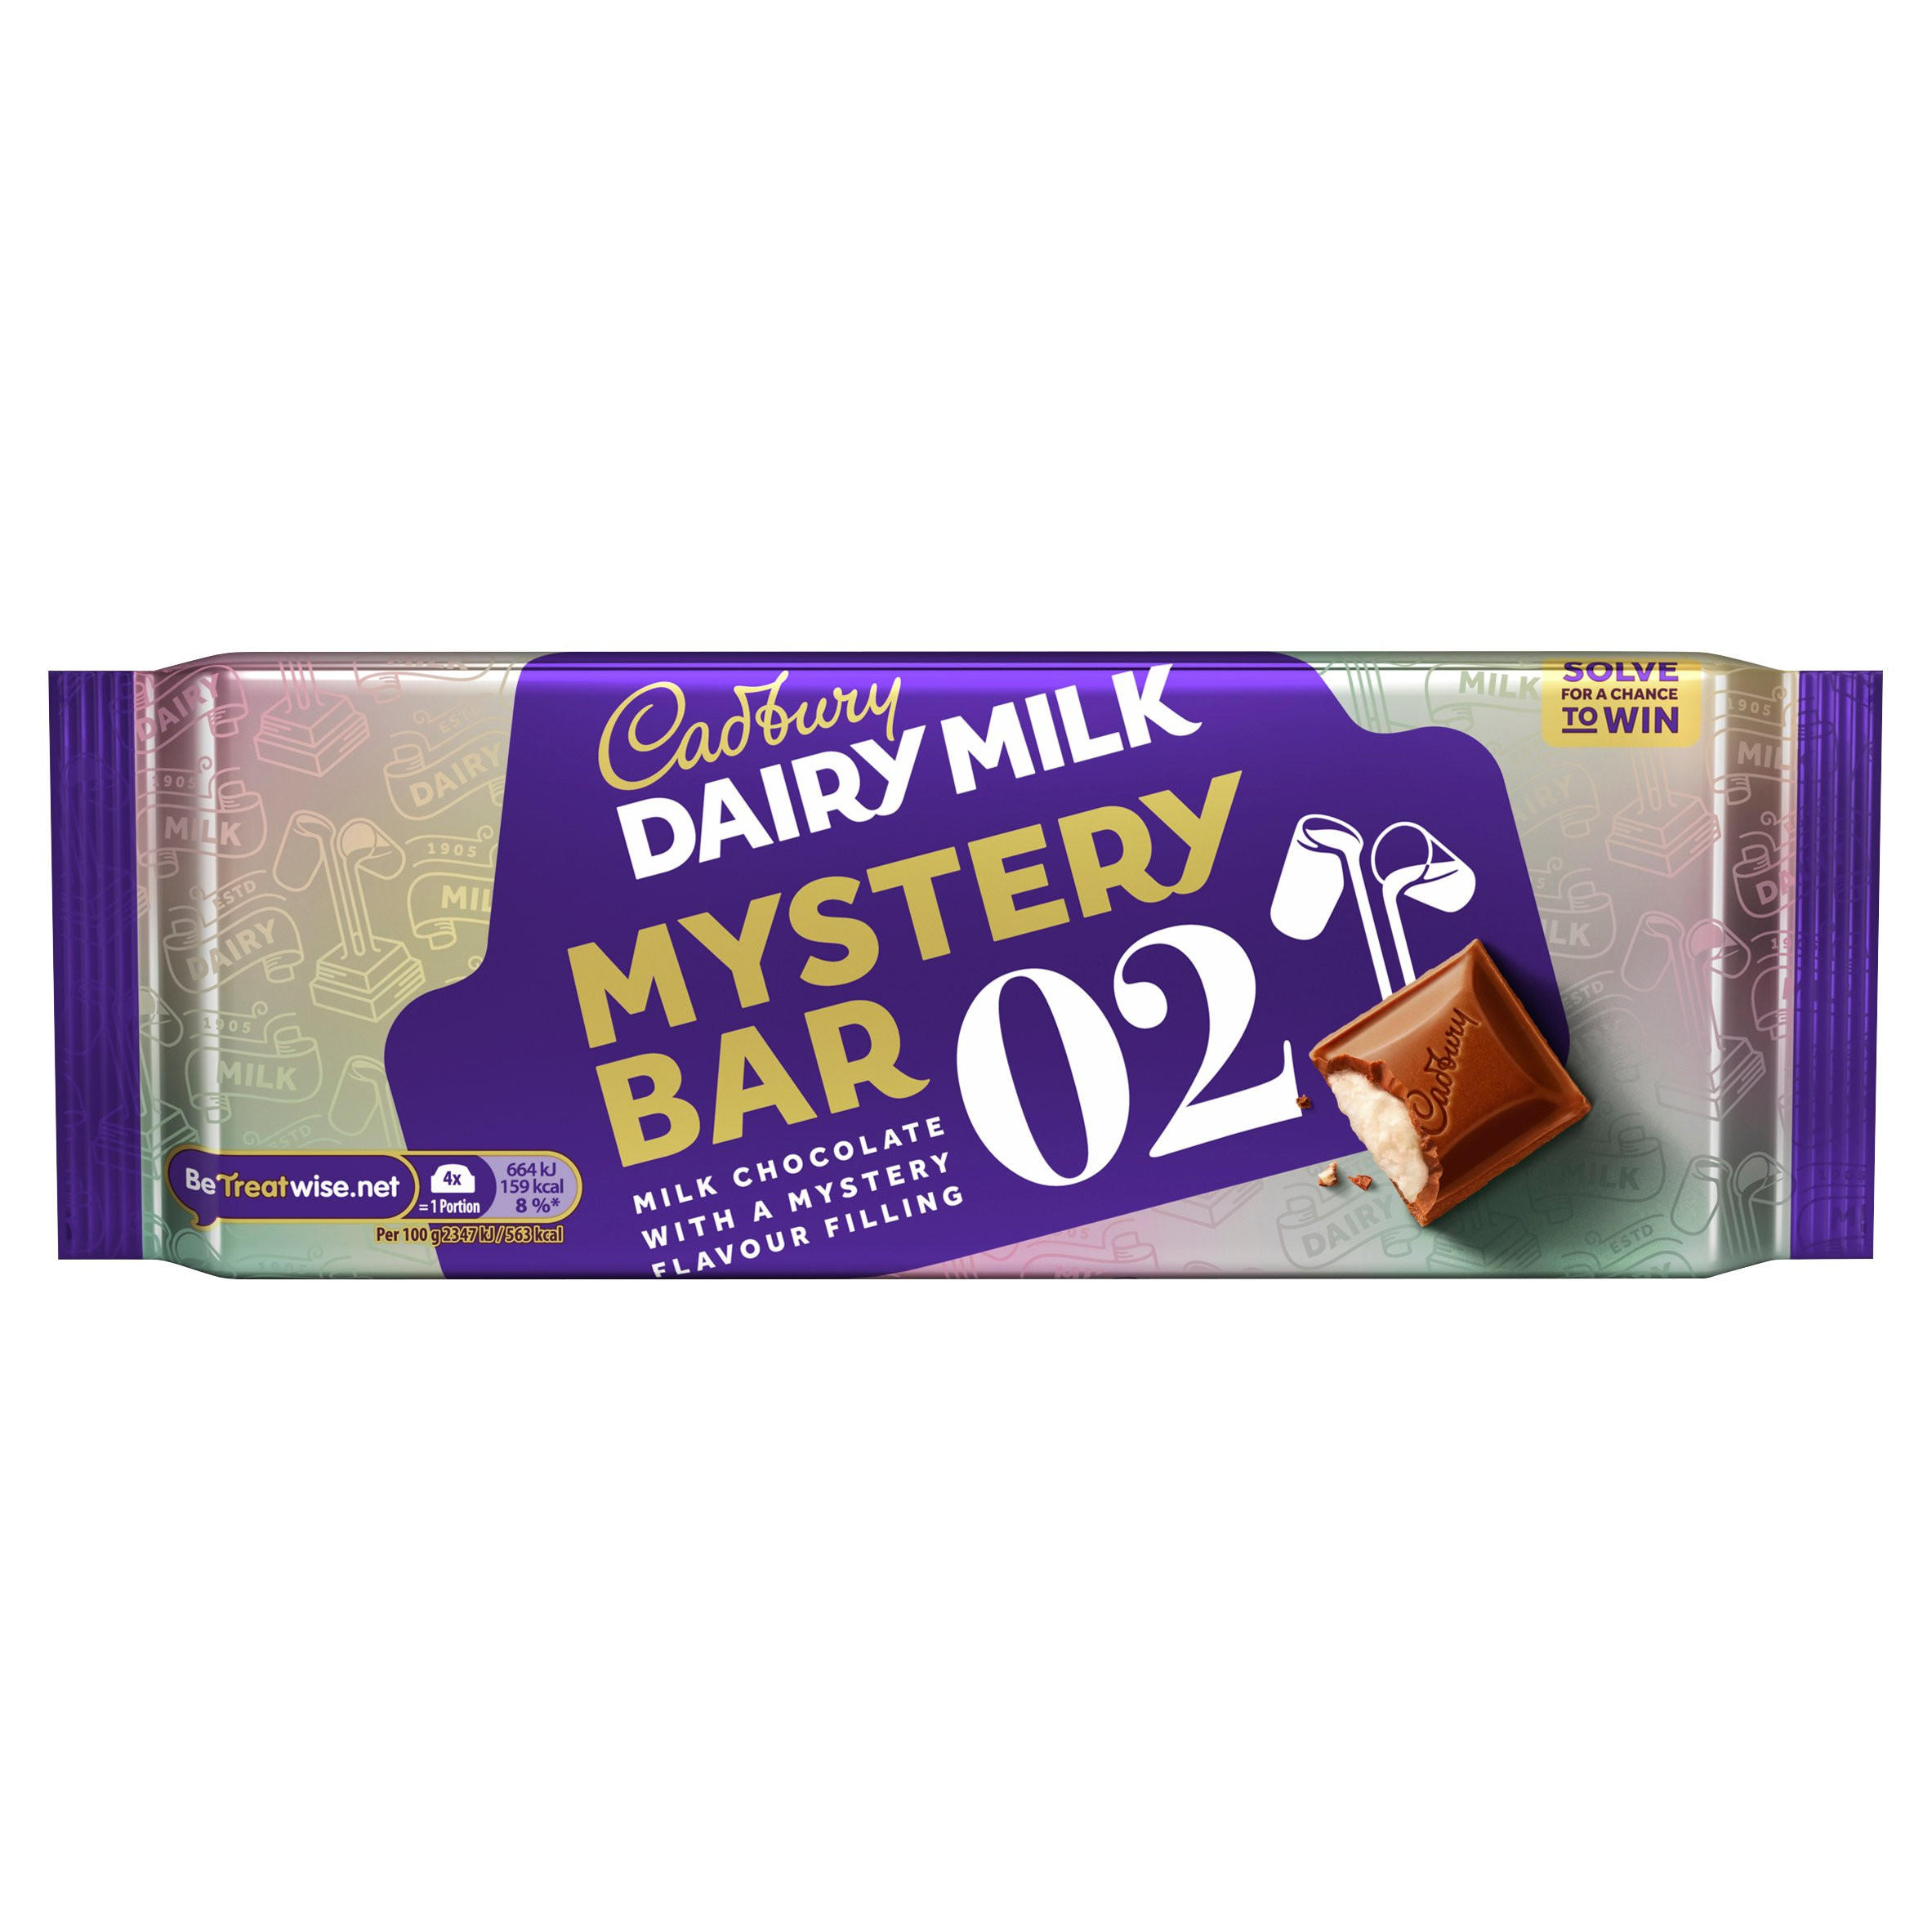 https://assets.iceland.co.uk/i/iceland/cadbury_dairy_milk_mystery_bar_02_milk_chocolate_with_a_mystery_flavour_filling_170g_91217_T1.jpg